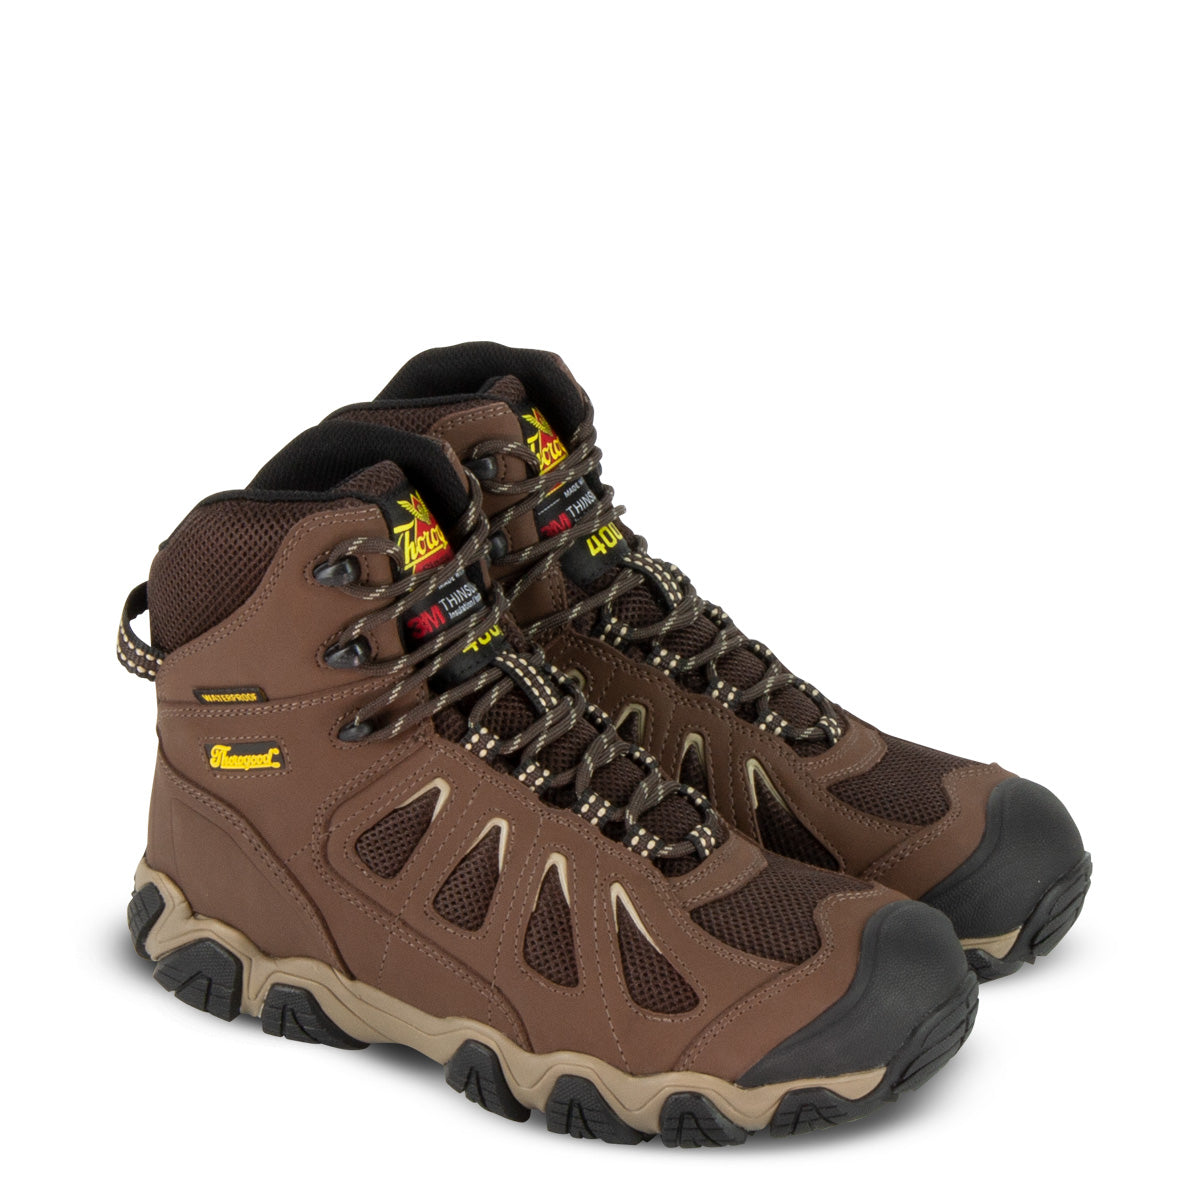 Thorogood Men's Crosstrex Series 6" 400g Insulated Waterproof Hiking Boot in Brown from the side